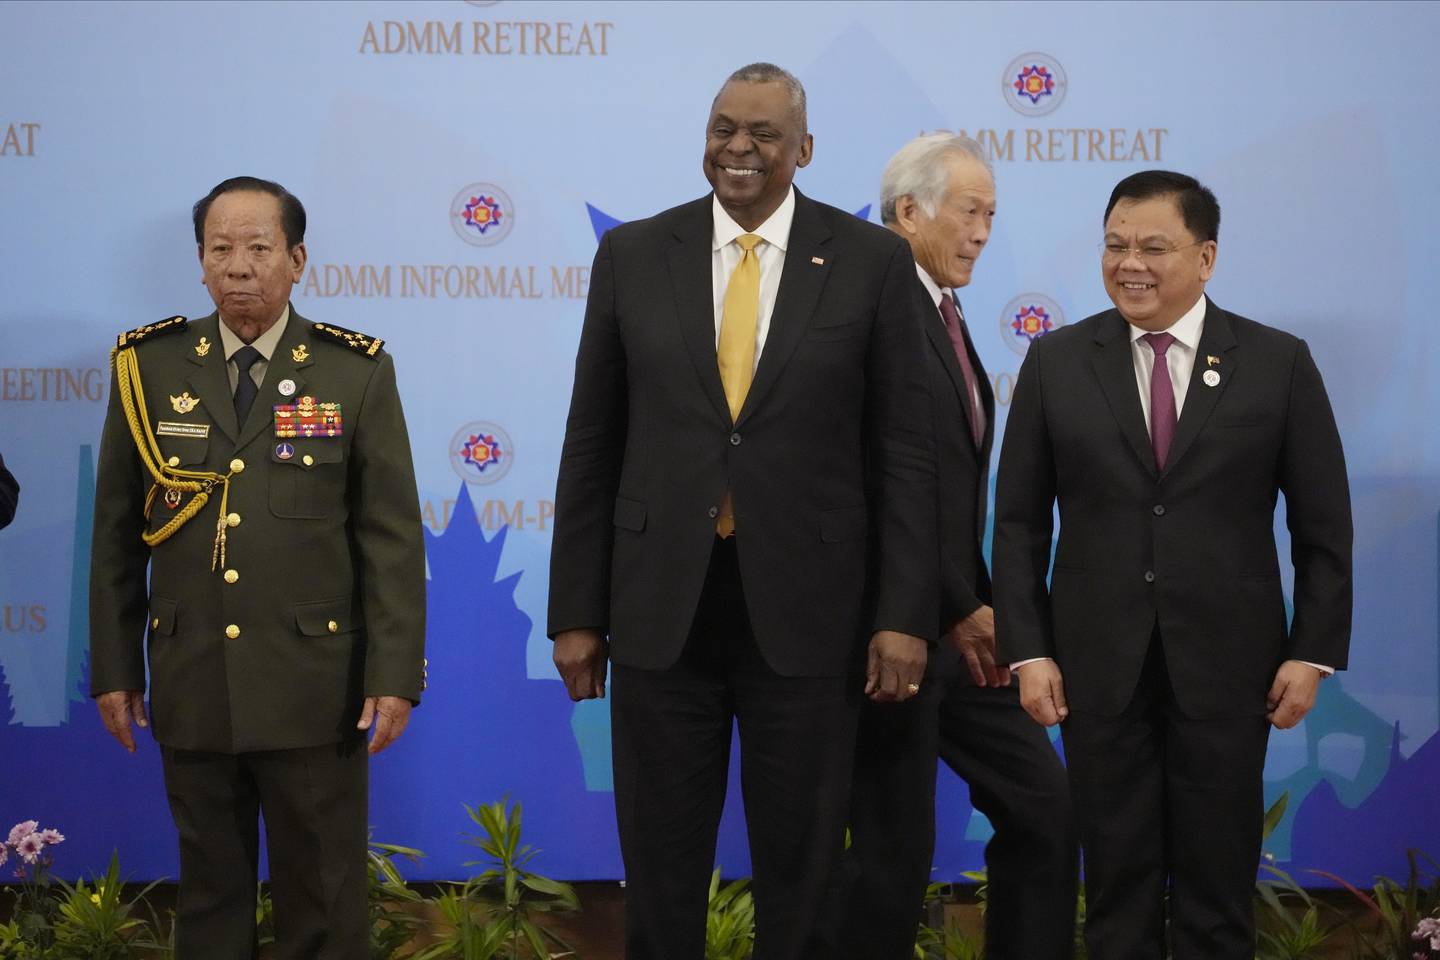 U.S. Secretary of Defense Lloyd J. Austin III, center, poses for a group photo together with Cambodia's Defense Minister Tea Banh, left, Philippines Senior Undersecretary Jose Faustino Jr., right, as Singapore Defense Minister Ng Eng Hen walks at the venue of the Association of Southeast Asian Nations (ASEAN) during the ASEAN-United State Defense Ministers' Informal Meeting in Siem Reap, Cambodia, Tuesday, Nov. 22, 2022.